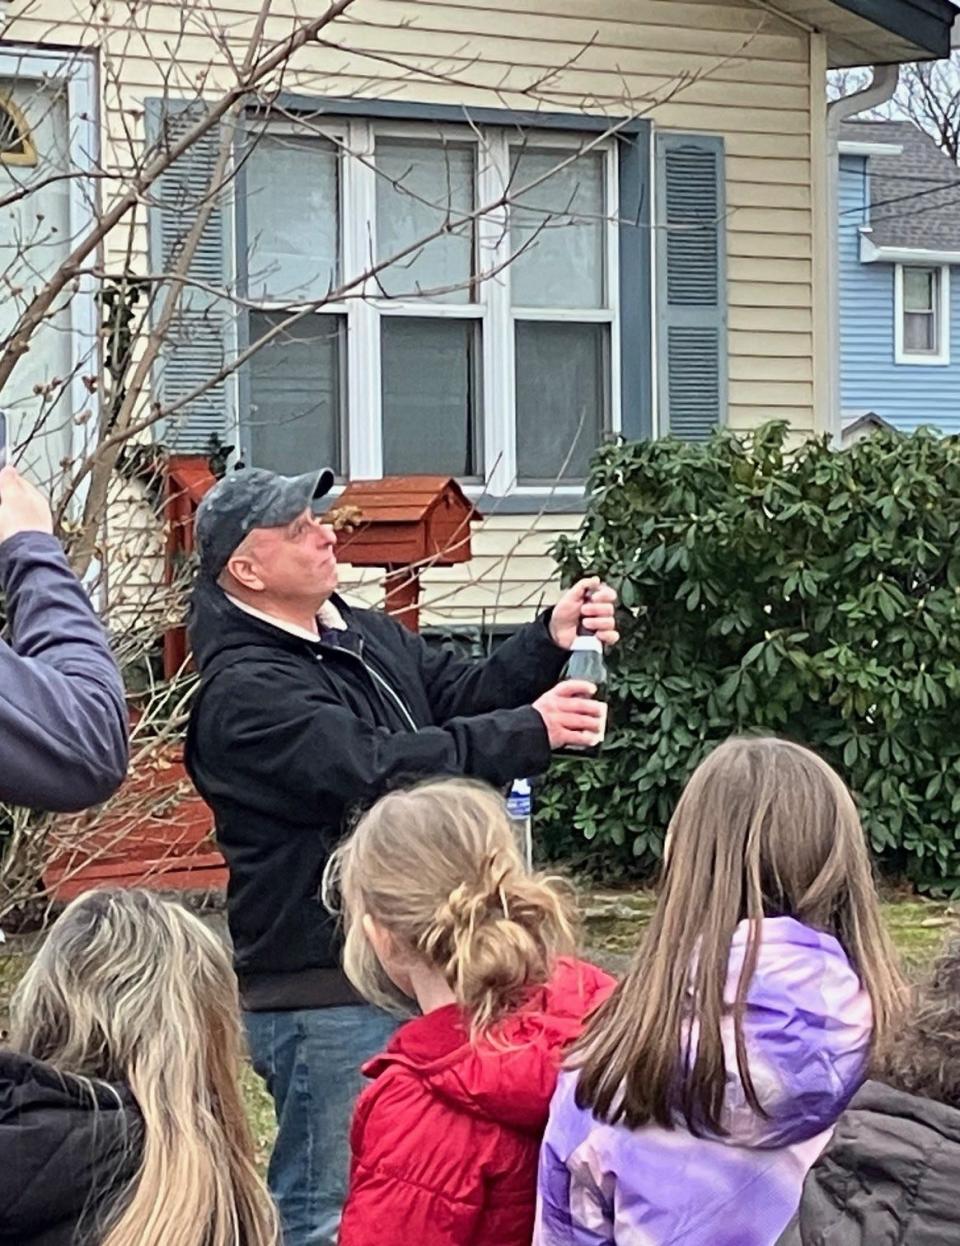 Edison resident Ron Loeffler pops a bottle to celebrate that a huge warehouse will not be built in his neighborhood after the township acquired the property.